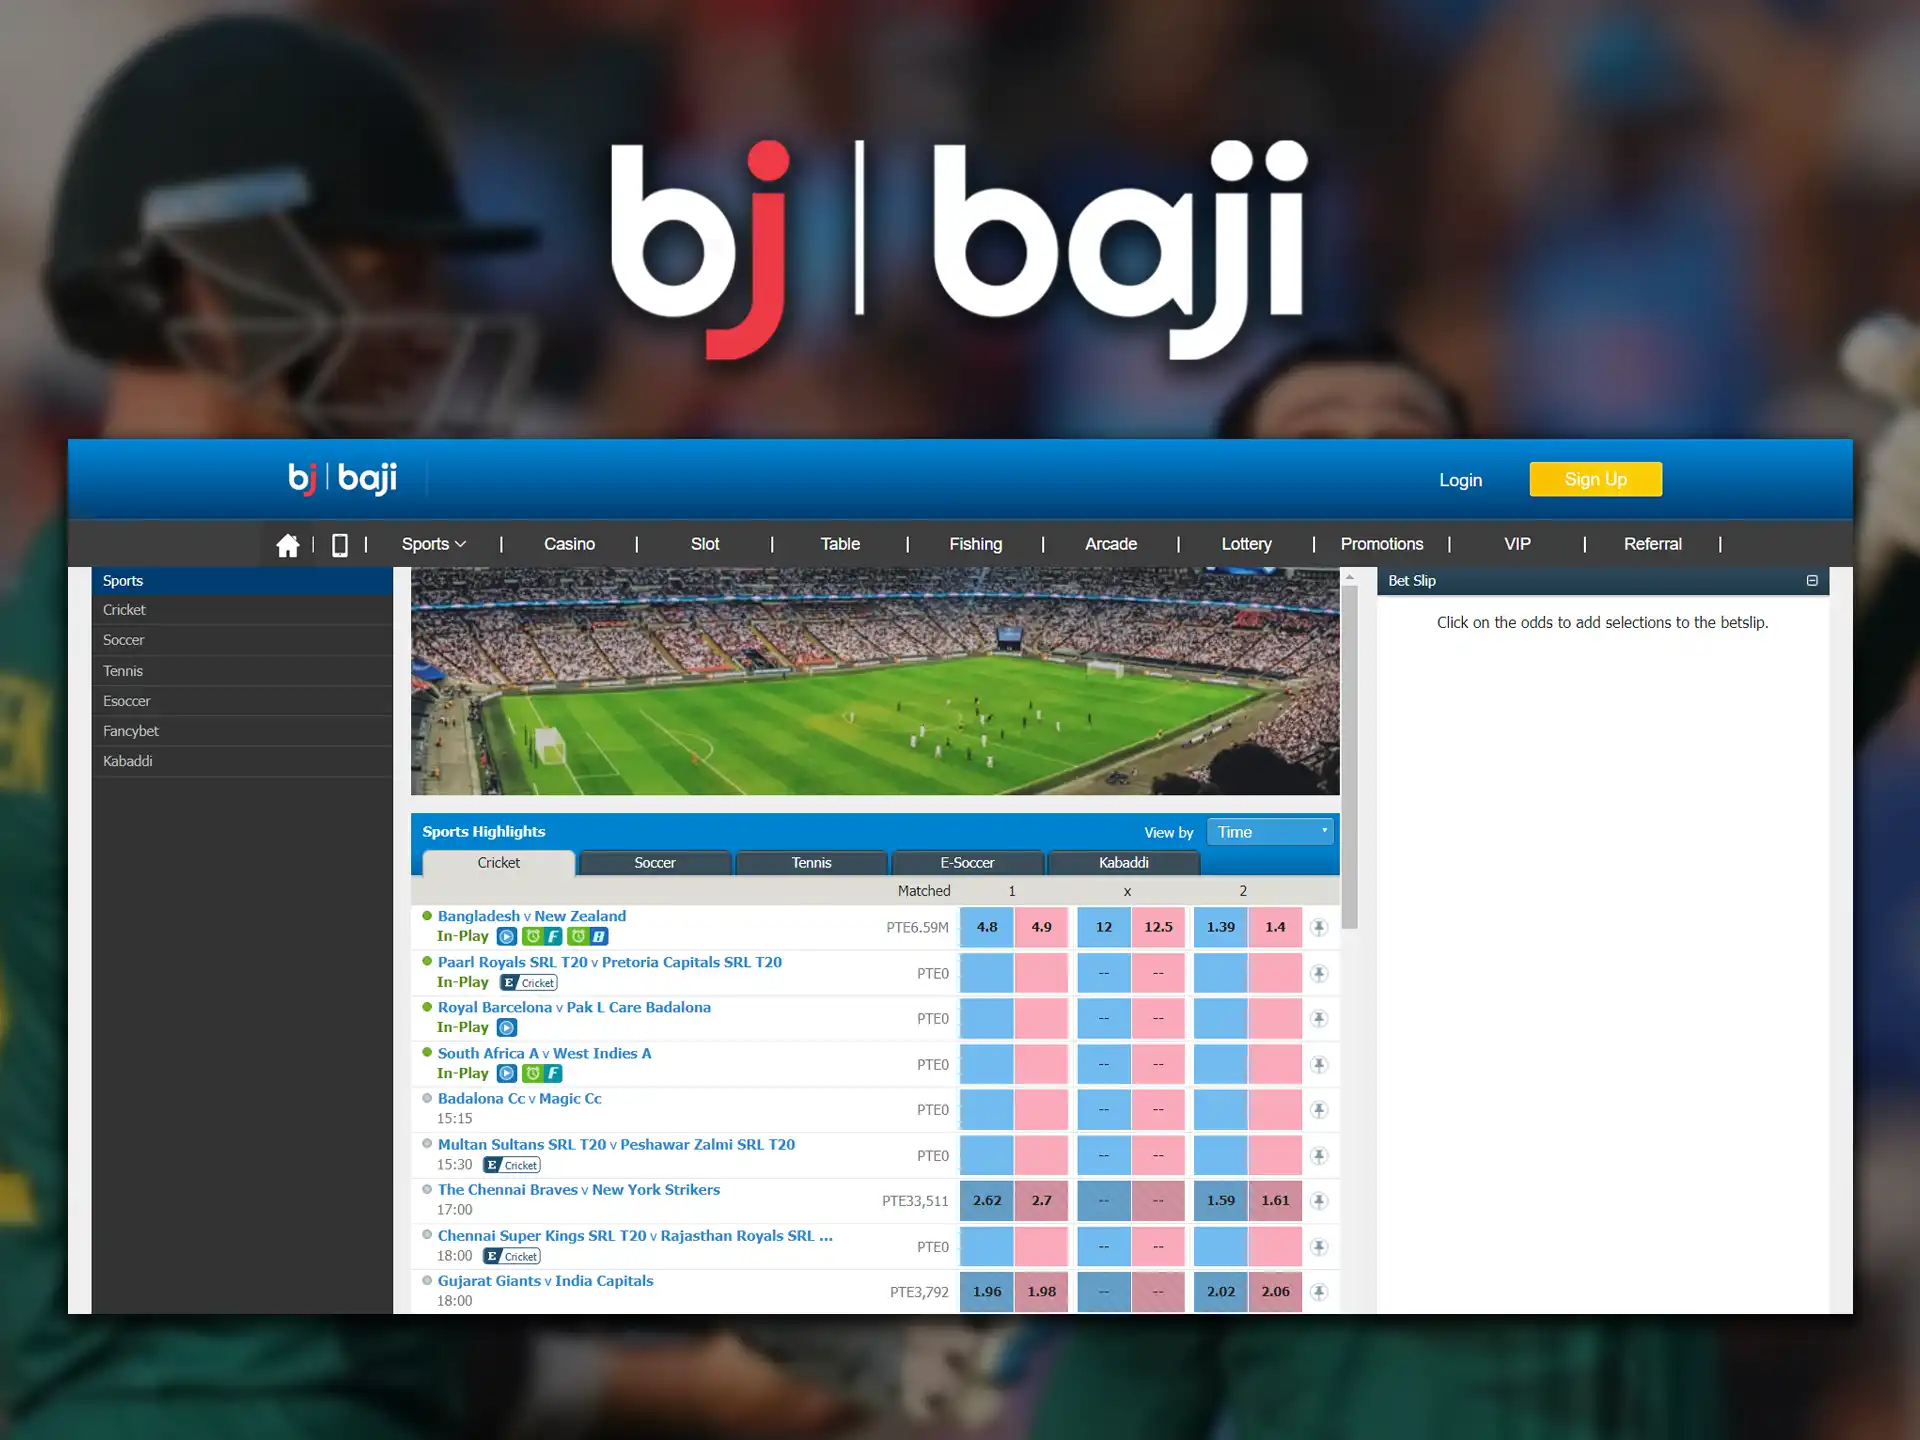 Baji Live is targeting the Indian audience and is giving its new players a welcome sports bonus of up to INR 10,000.